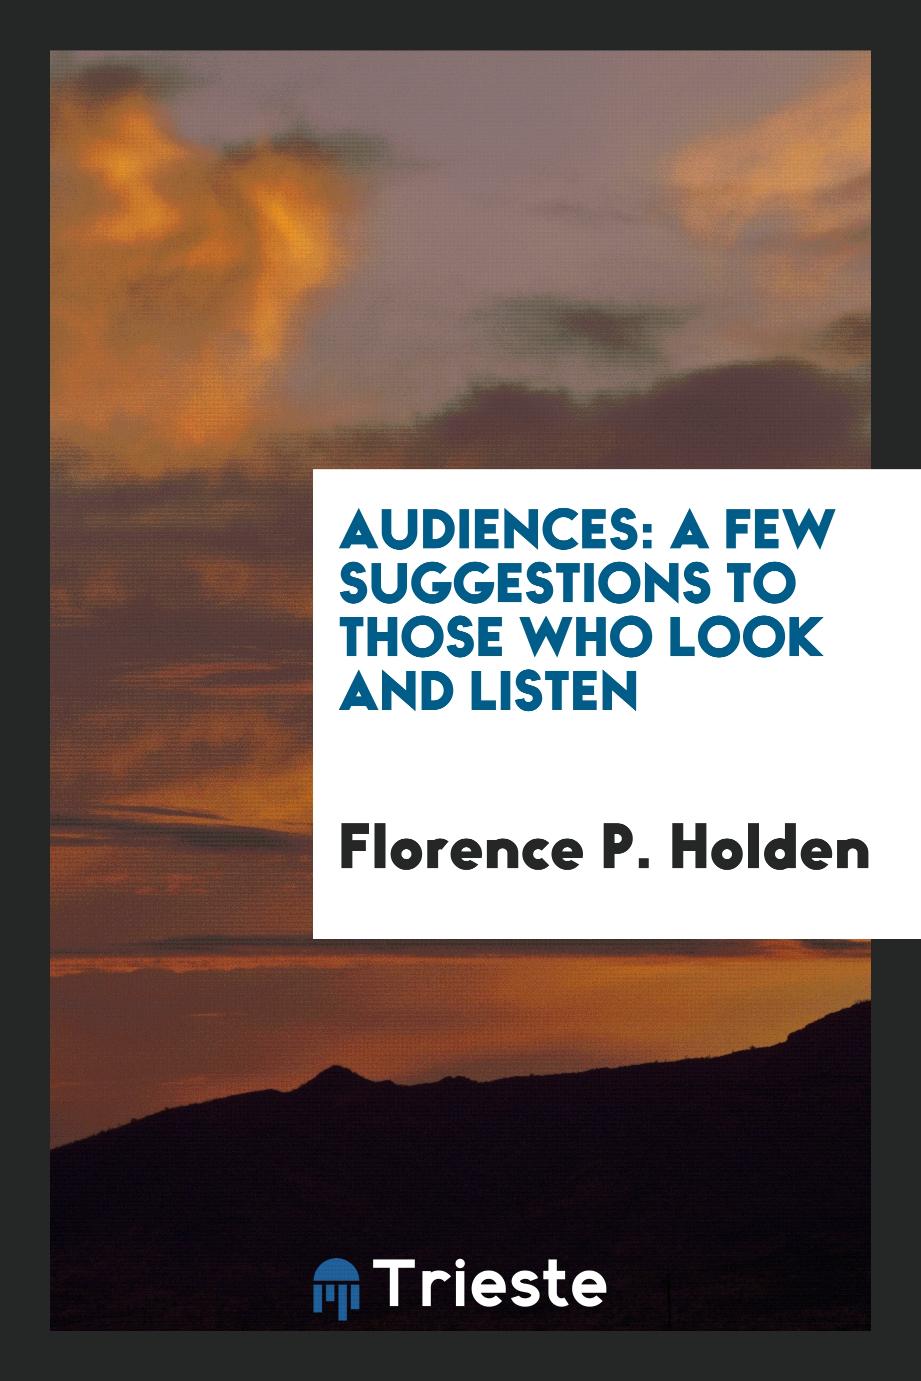 Audiences: a few suggestions to those who look and listen